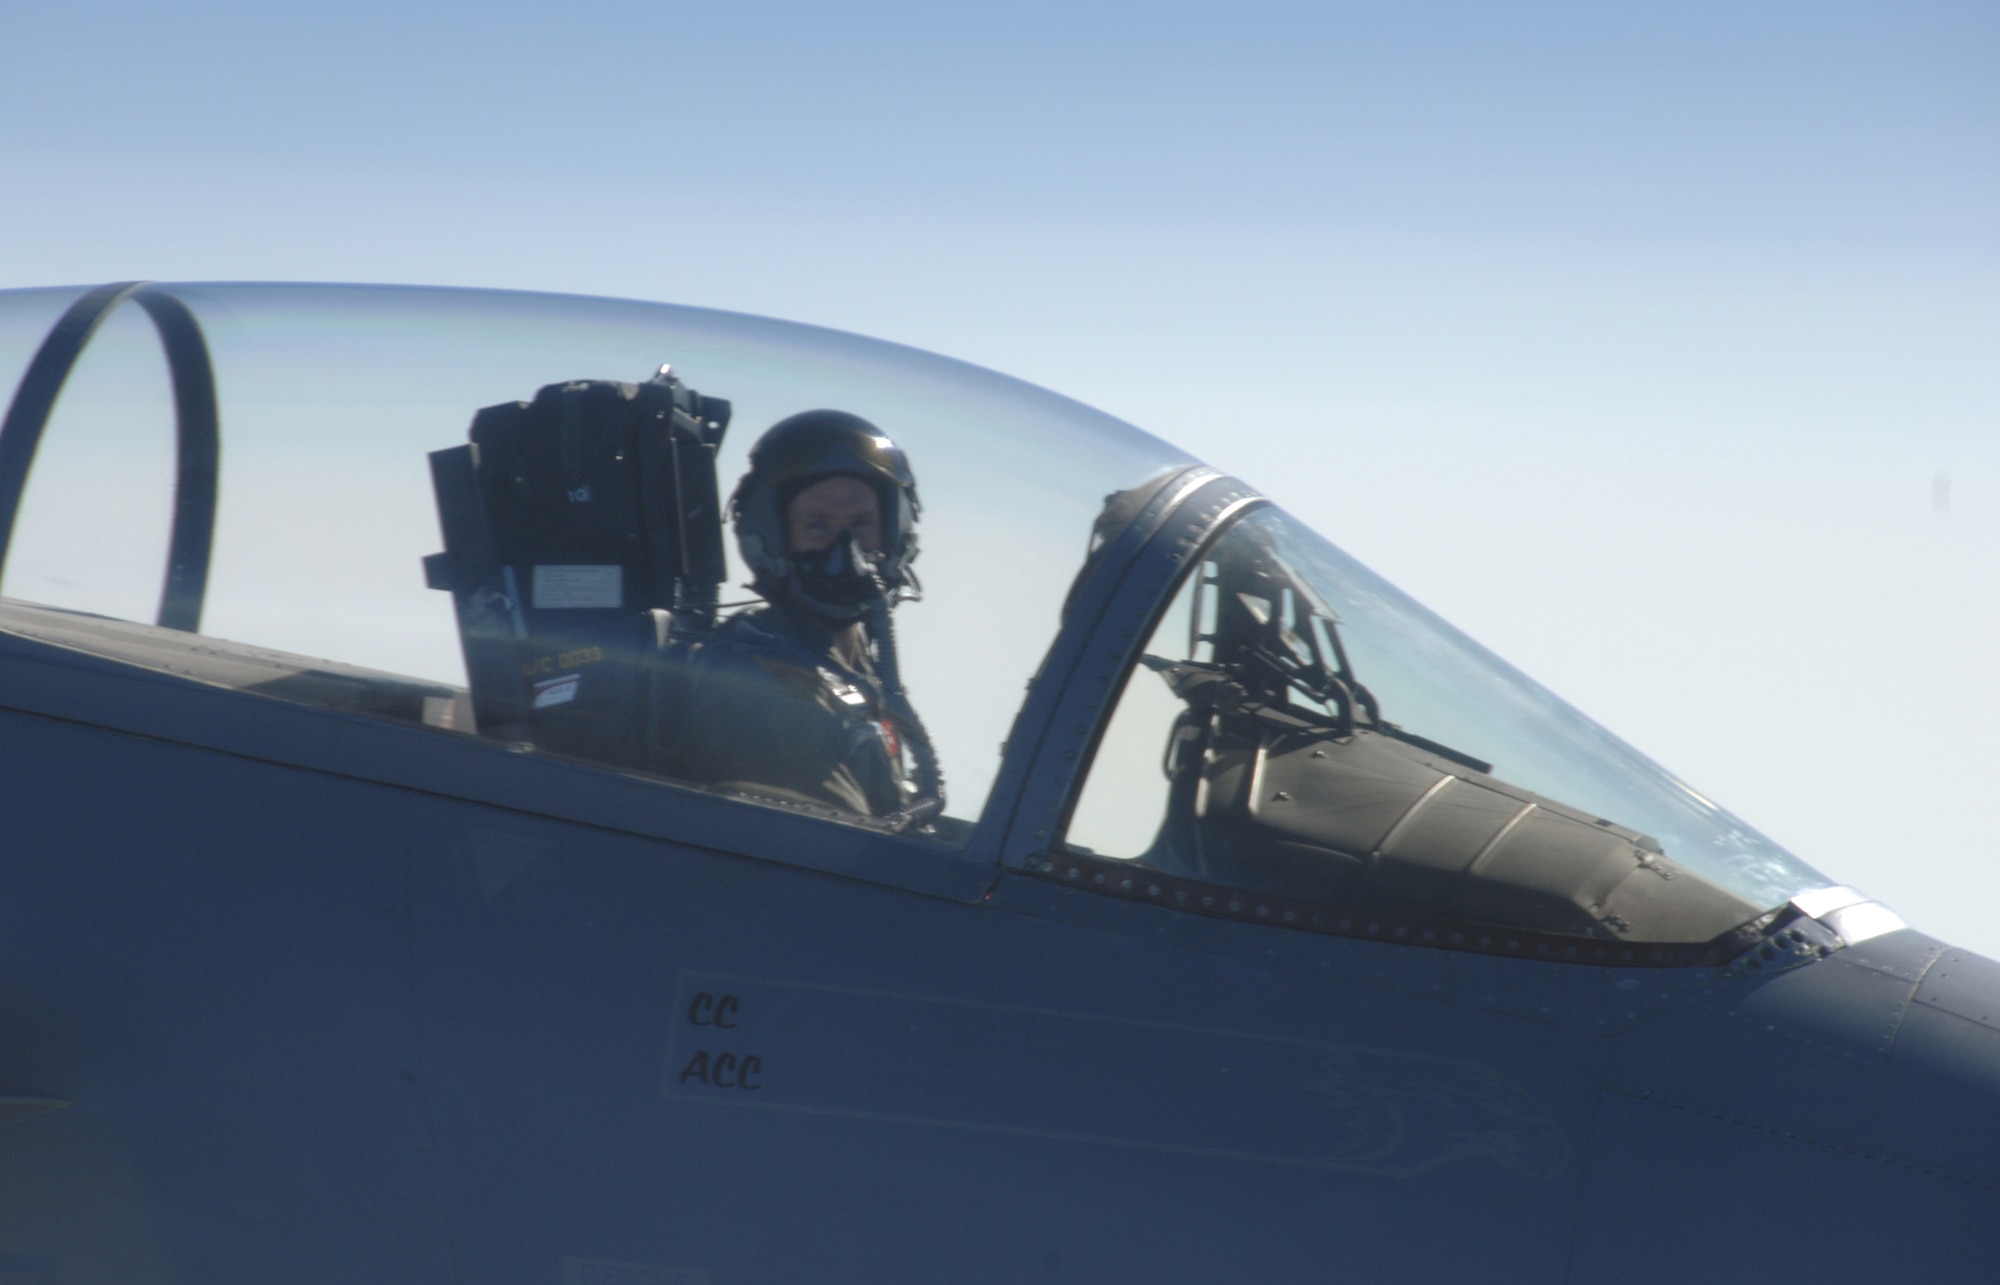 Lt. Col. John "Stick" Abell, 110th Fighter Squadron pilot, flies his F-15 Eagle in Aerial Combat Maneuvers Sept. 25.  Colonel Abell was participating with other pilots from the 110th Fighter Squadron in the training. (Photo by Capt. Timothy Reinhart)